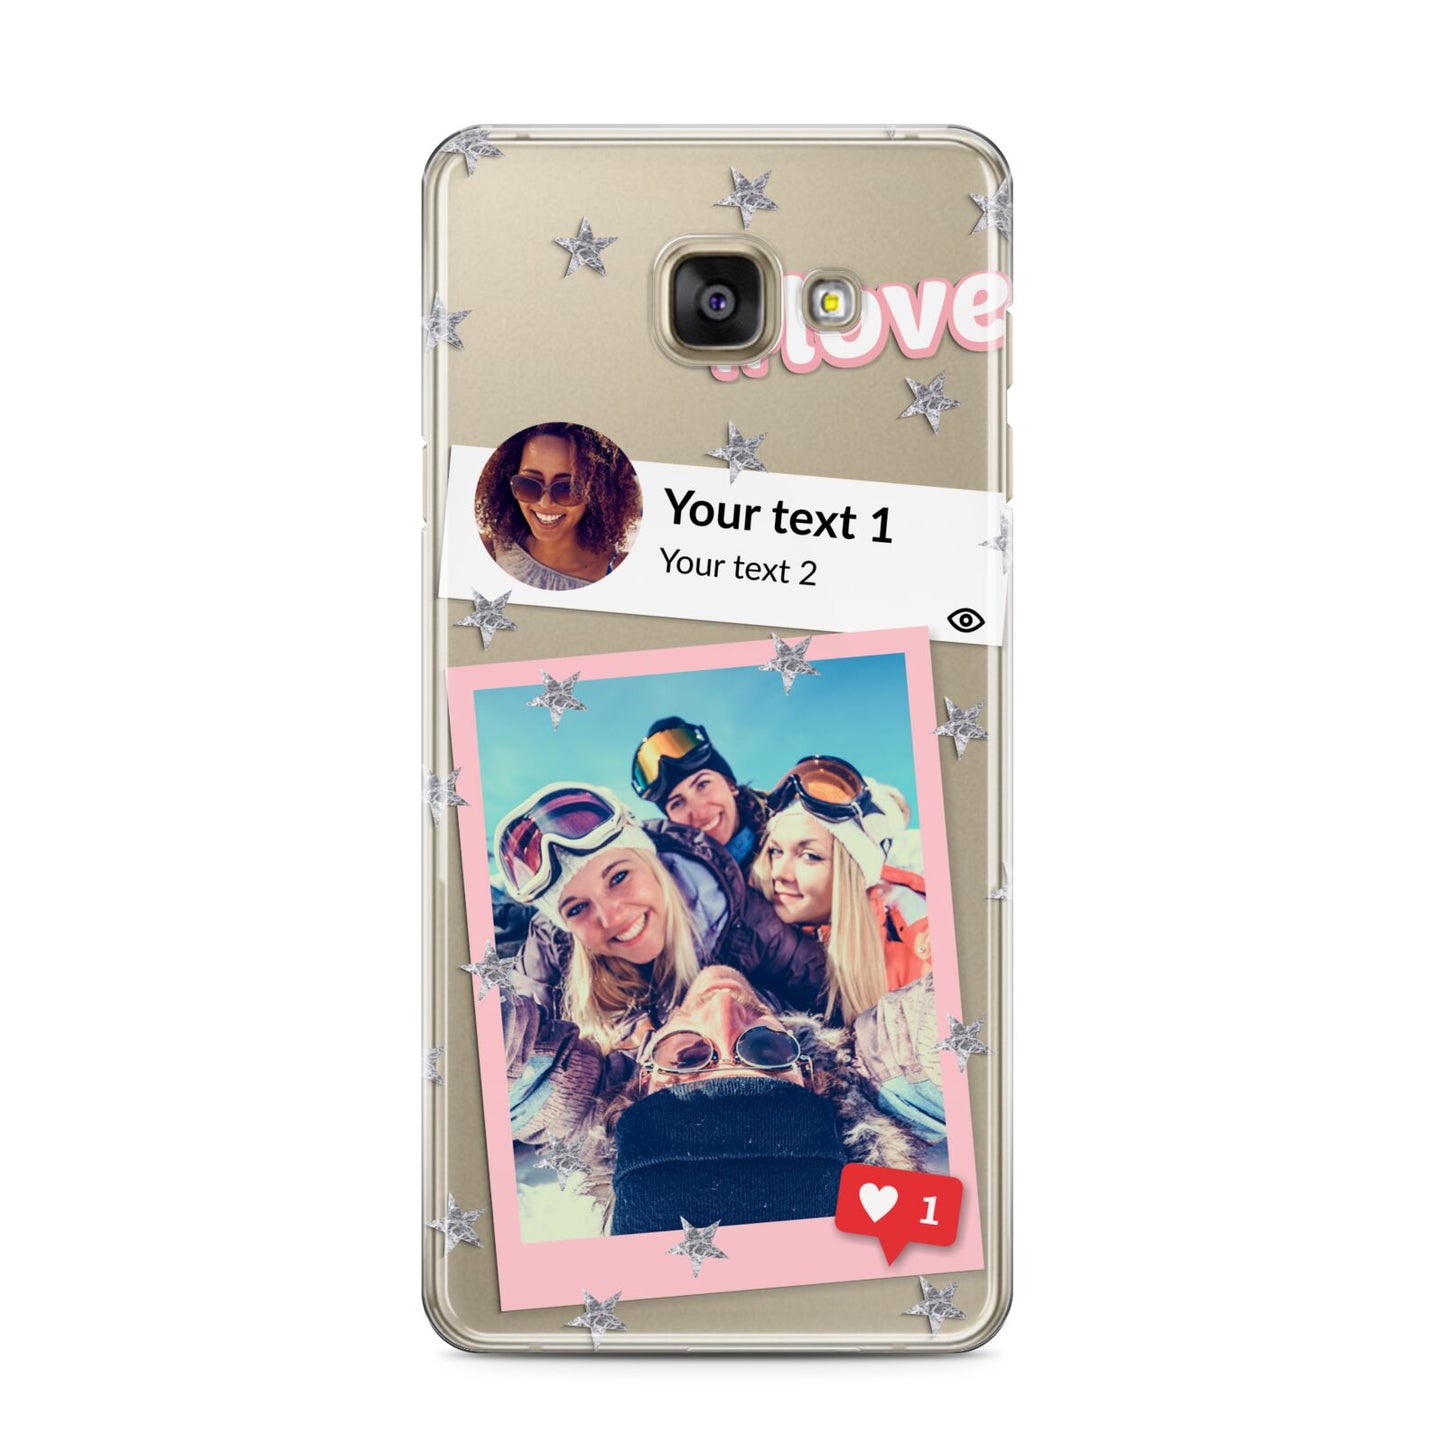 Starry Social Media Photo Montage Upload with Text Samsung Galaxy A3 2016 Case on gold phone